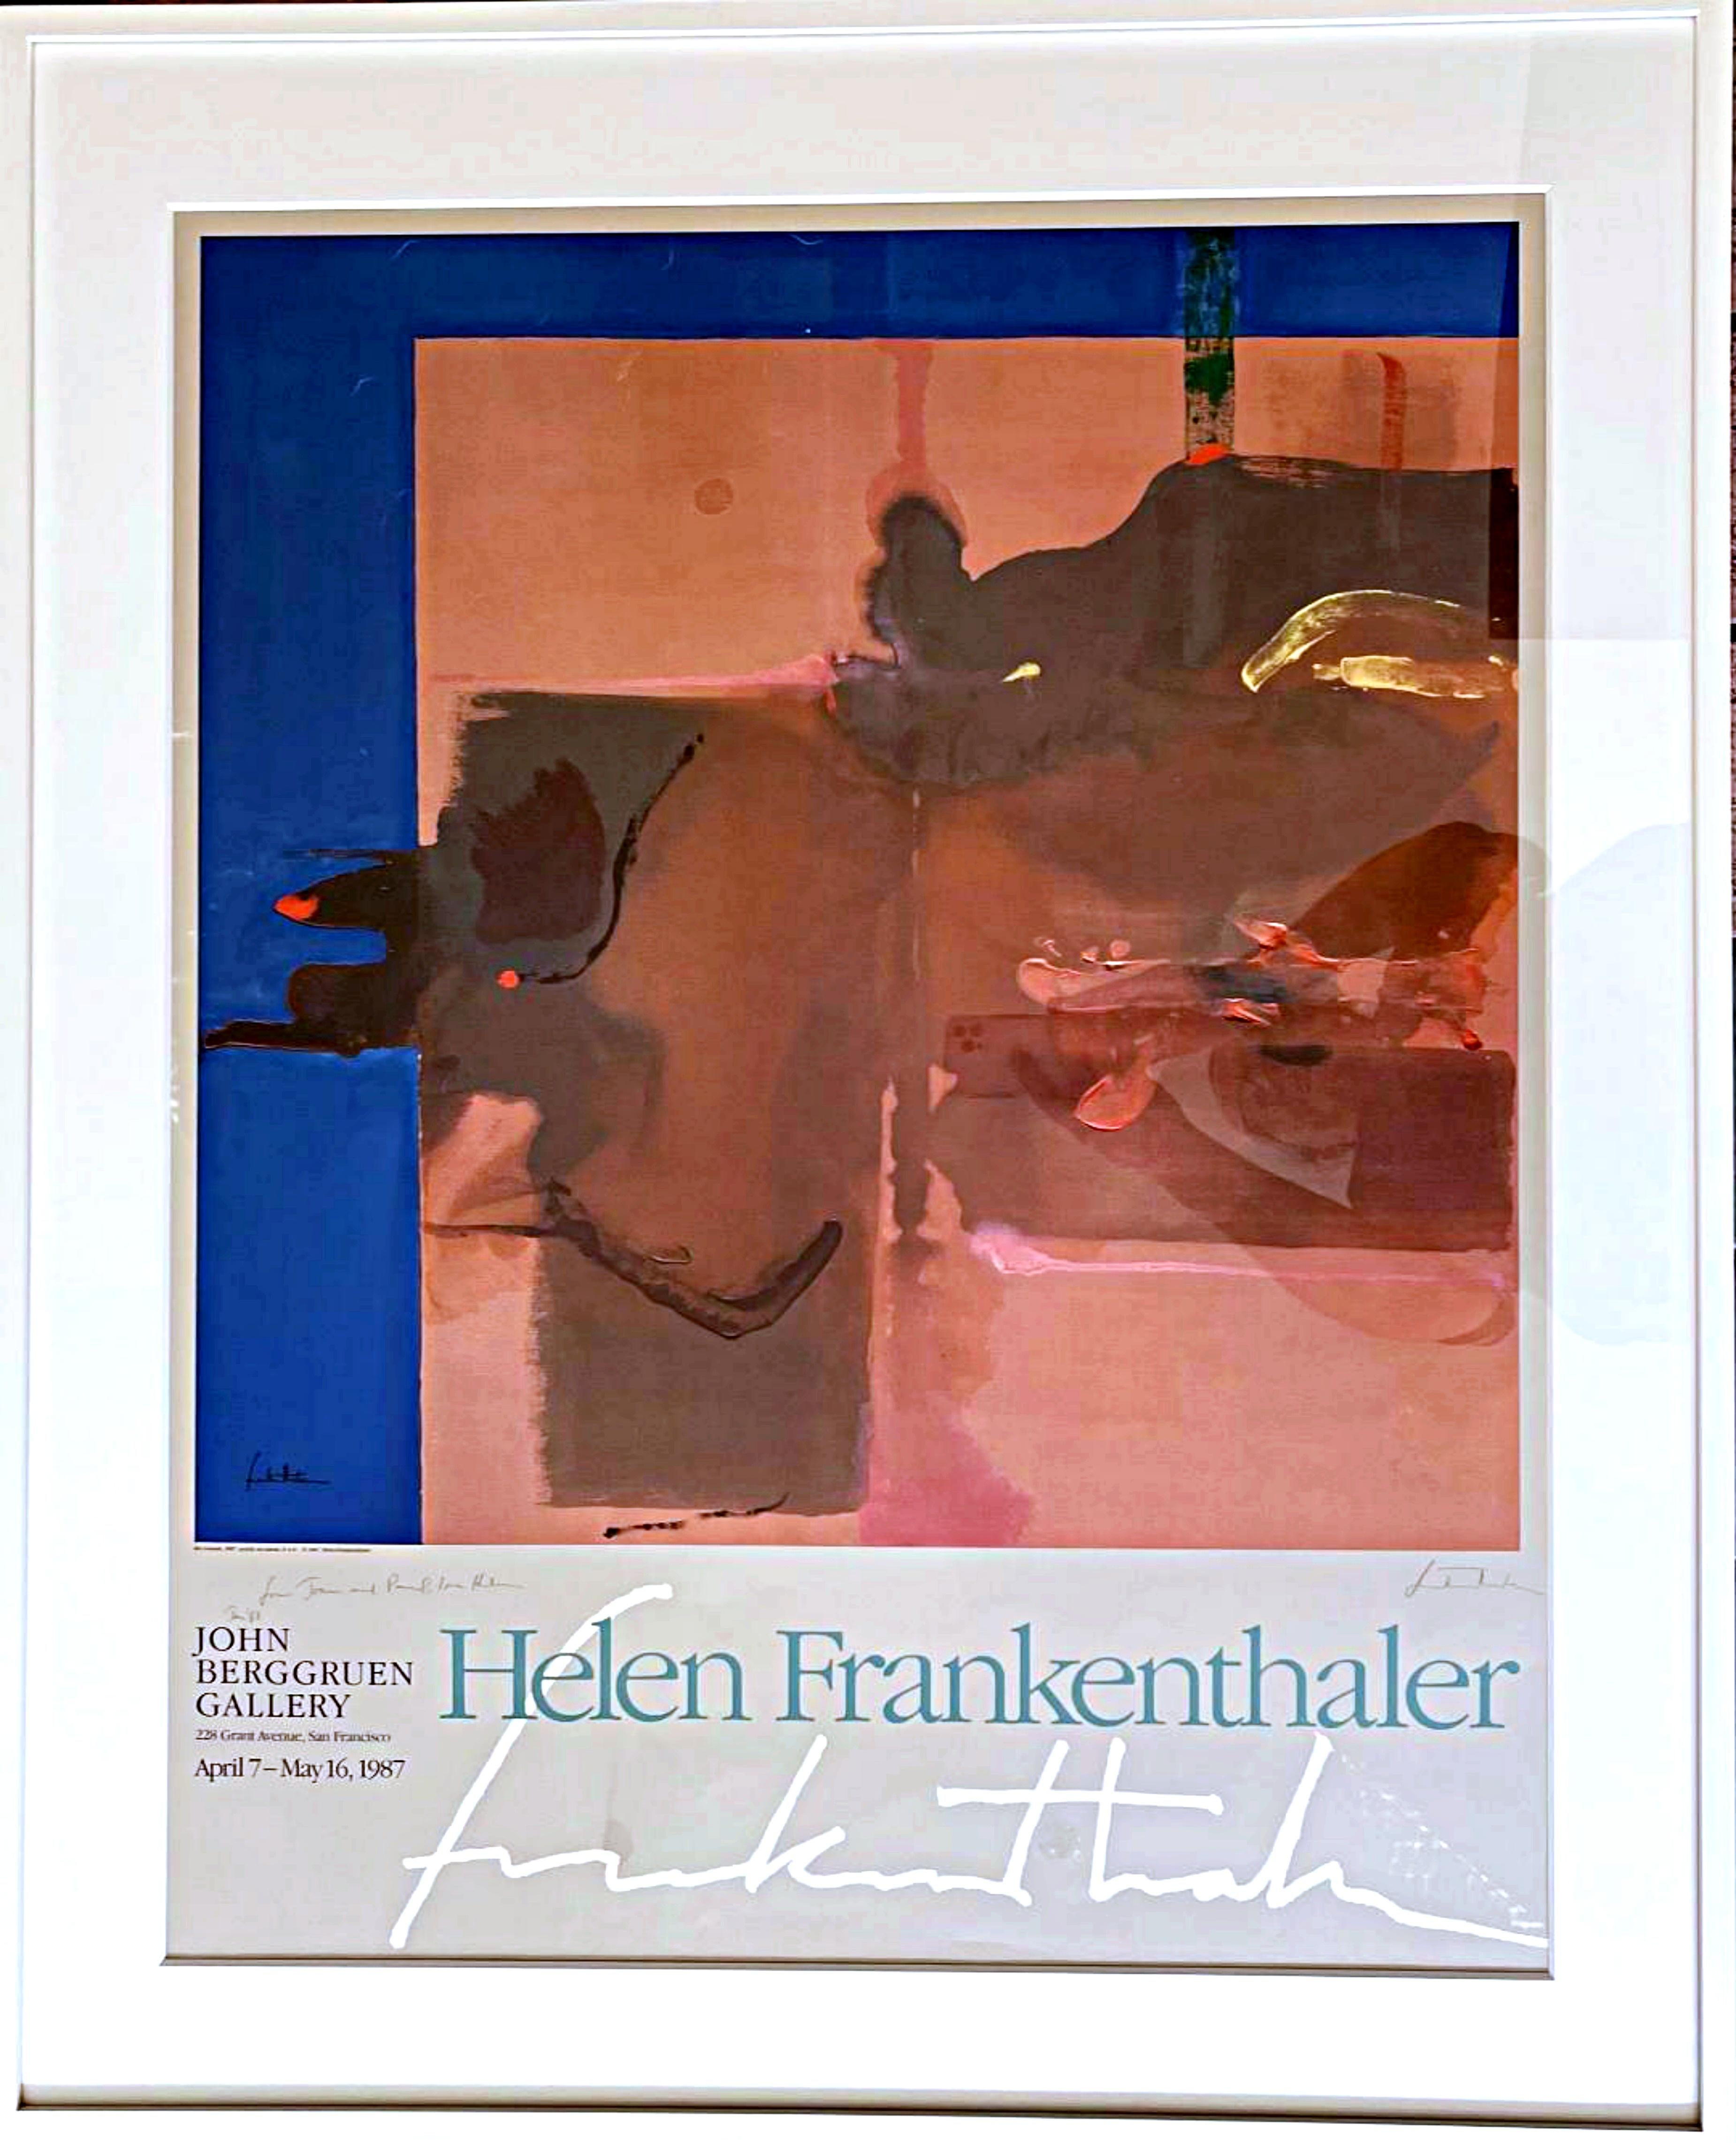 Helen Frankenthaler Abstract Print - Abstract Expressionist poster (Hand signed and inscribed by Henen Frankenthaler)